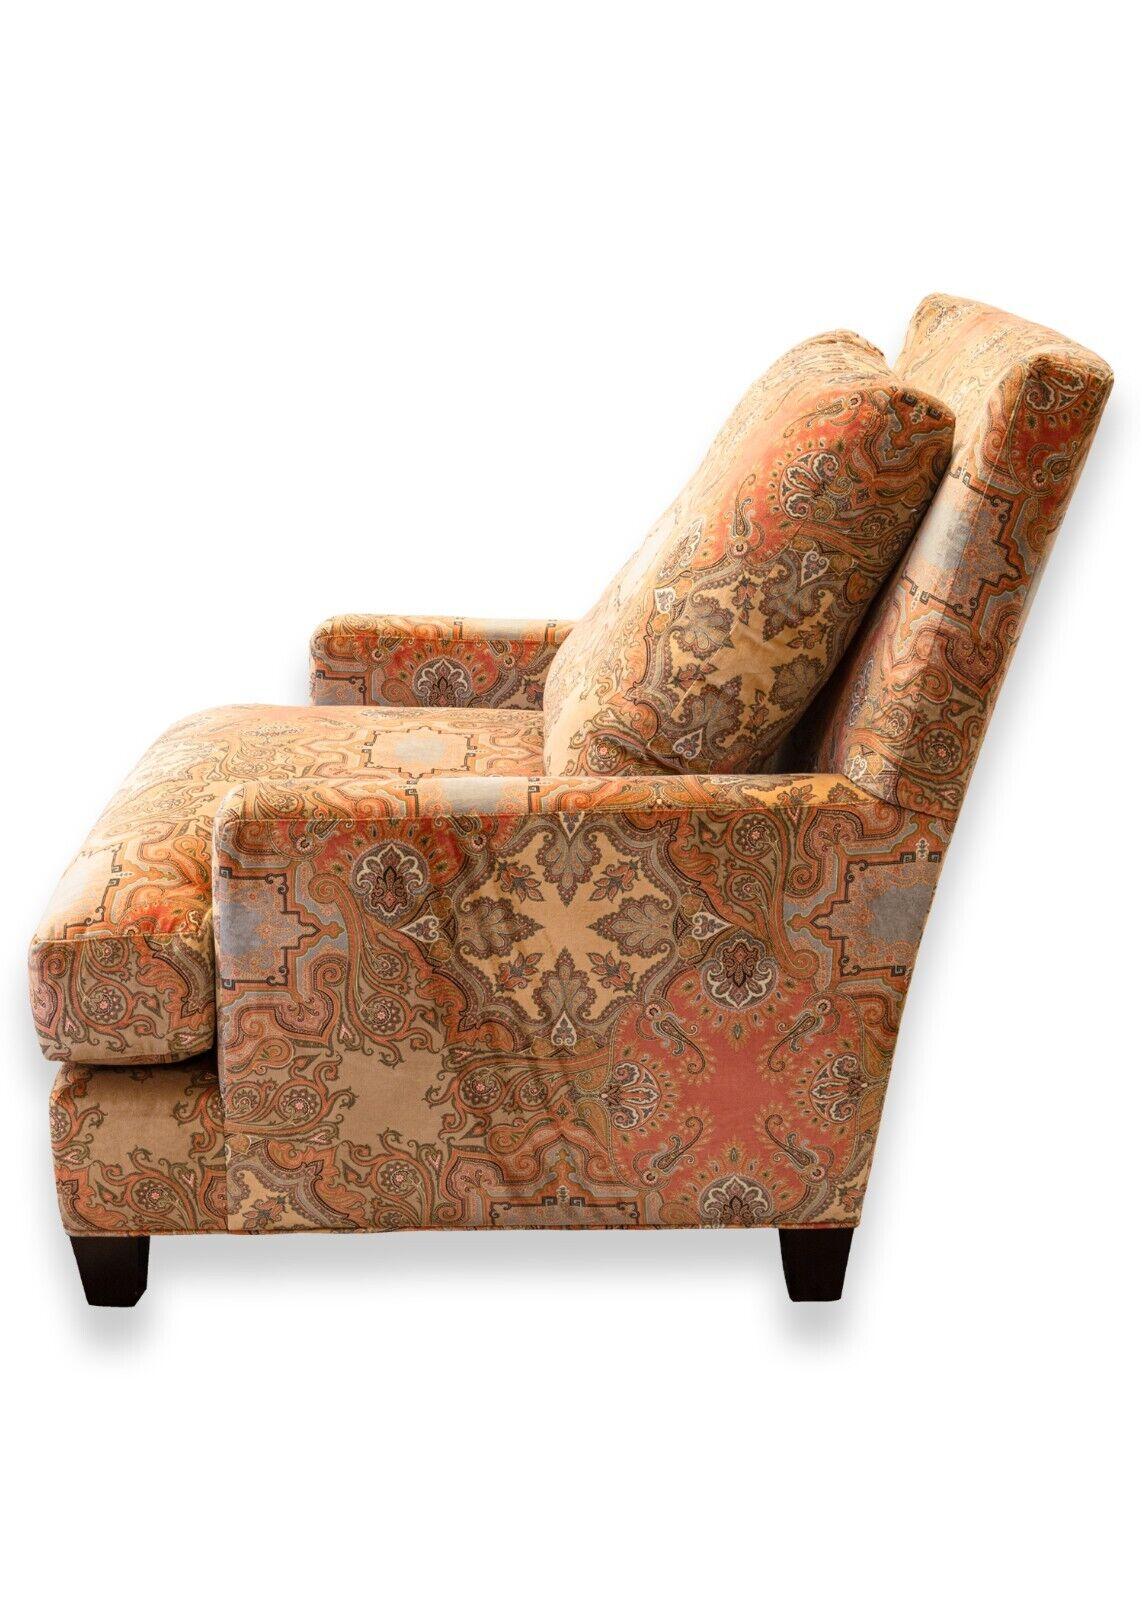 20th Century Baker Contemporary Paisley Upholstered Armchair & Ottoman